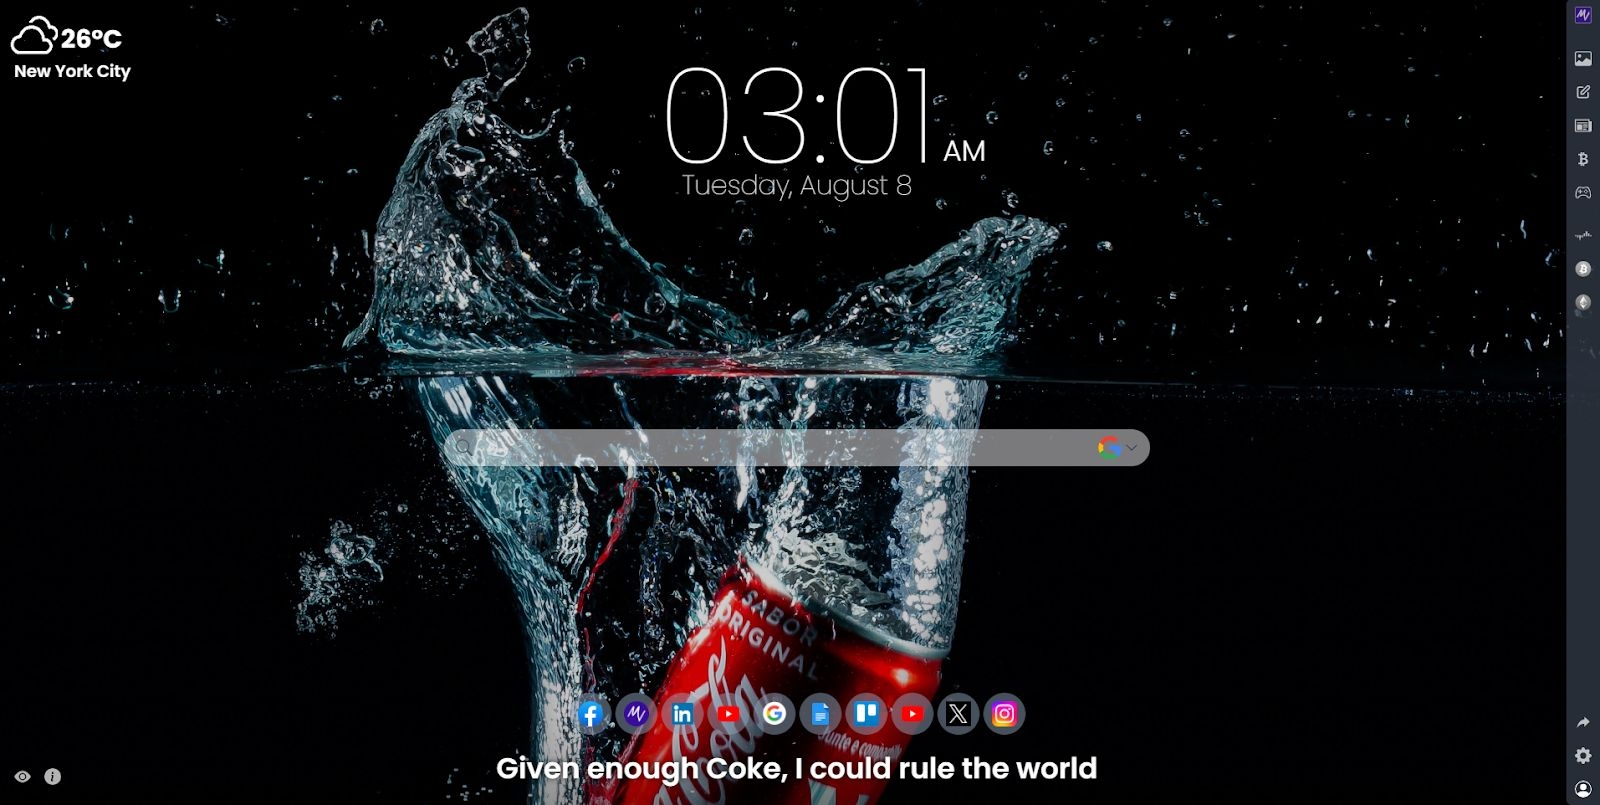 Discover Refreshing Delights with the MeaVana Chrome Extension: Coca-Cola Extravaganza